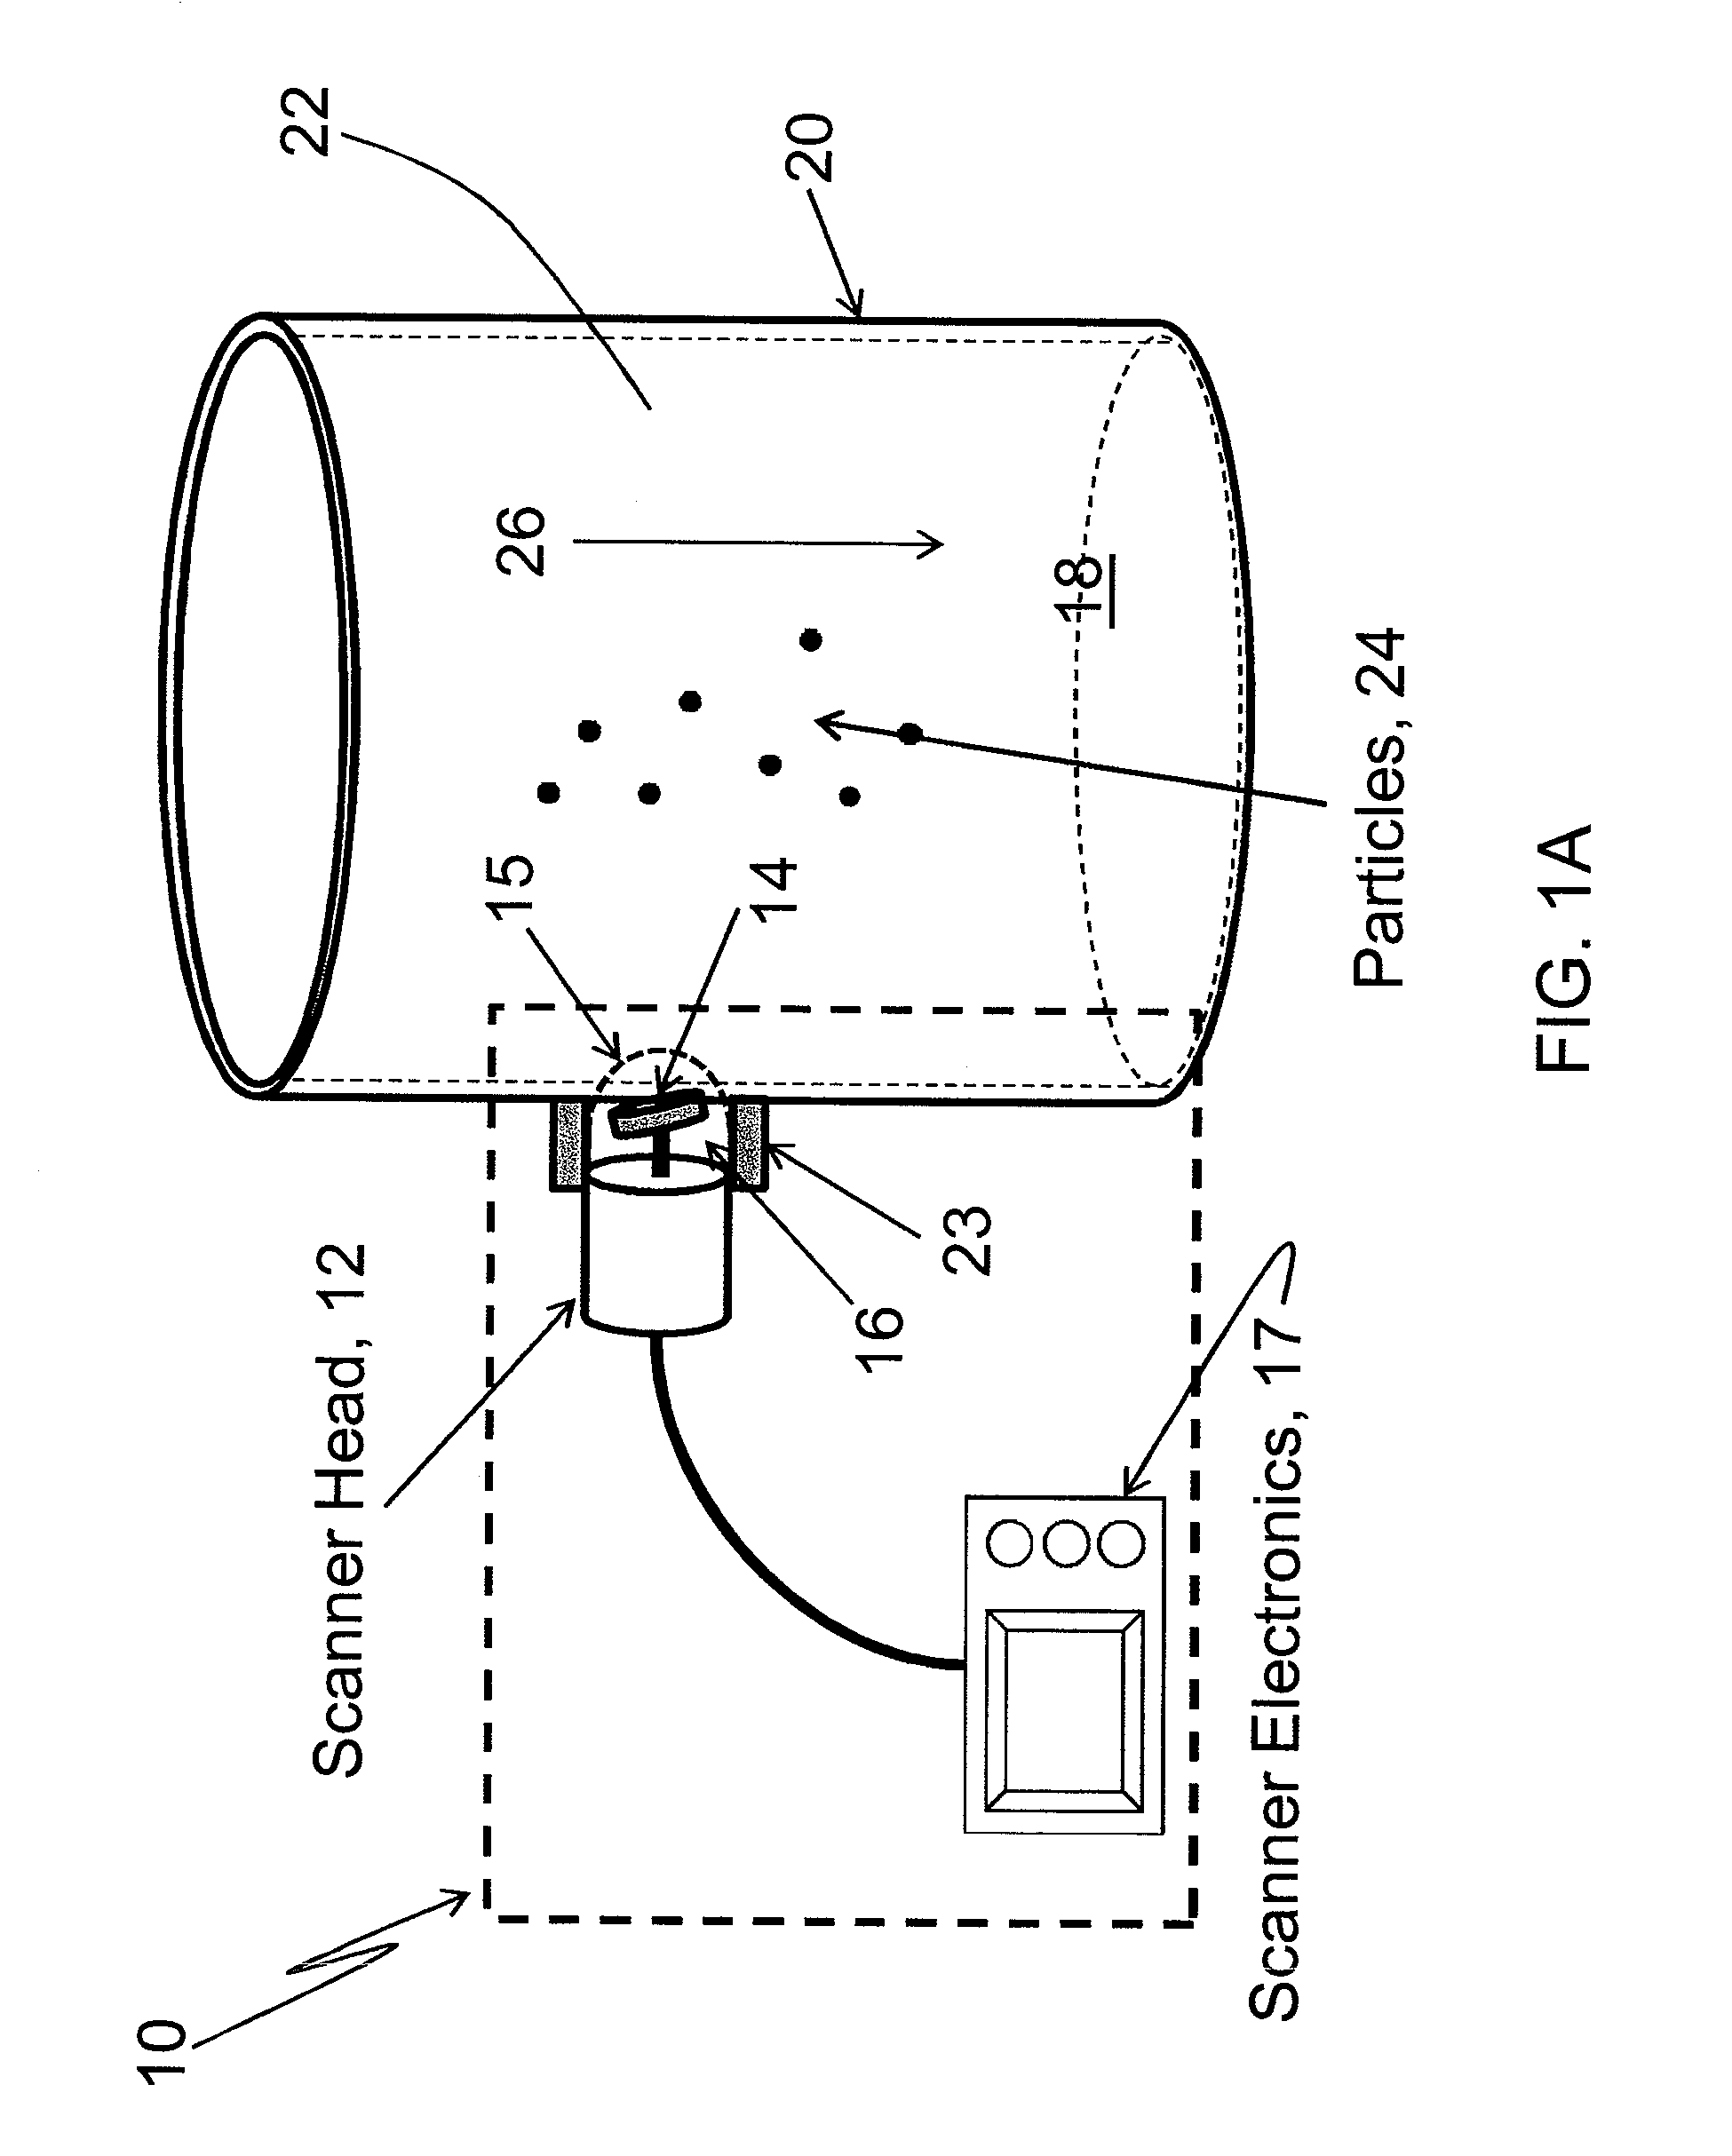 Apparatus and method for visualization of particles suspended in a fluid and fluid flow patterns using ultrasound